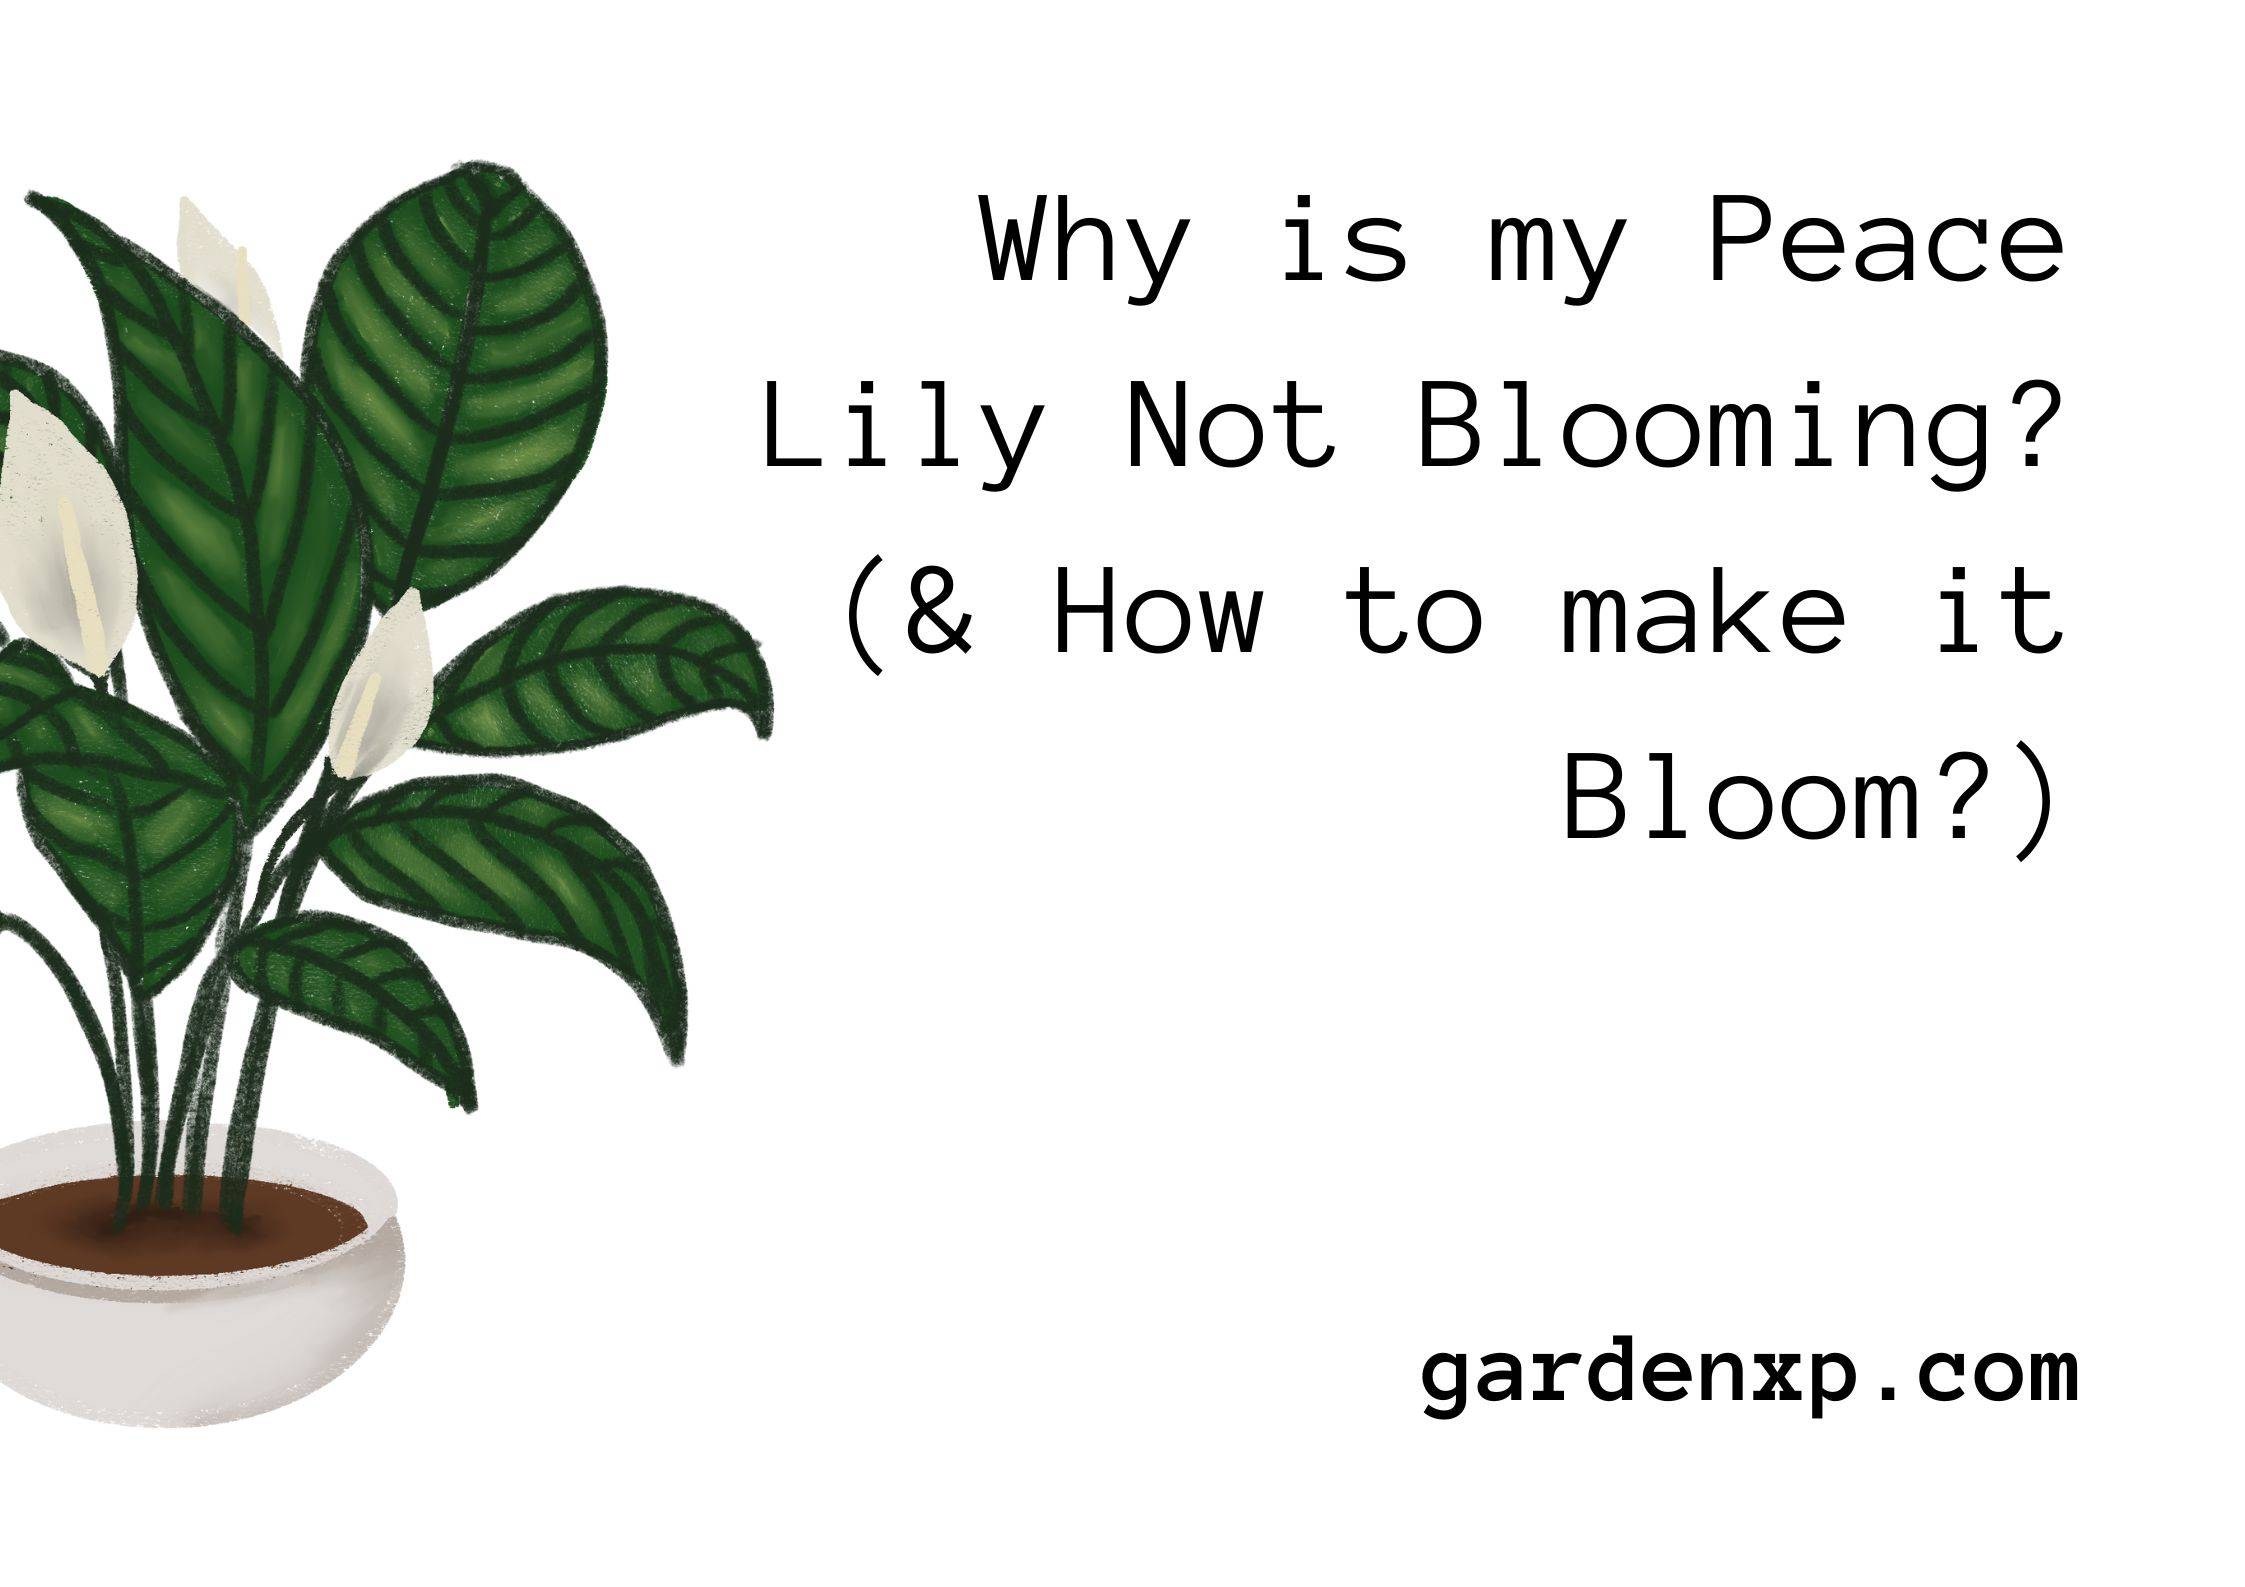 Why is my Peace Lily Not Blooming? (& How to make it Bloom?)